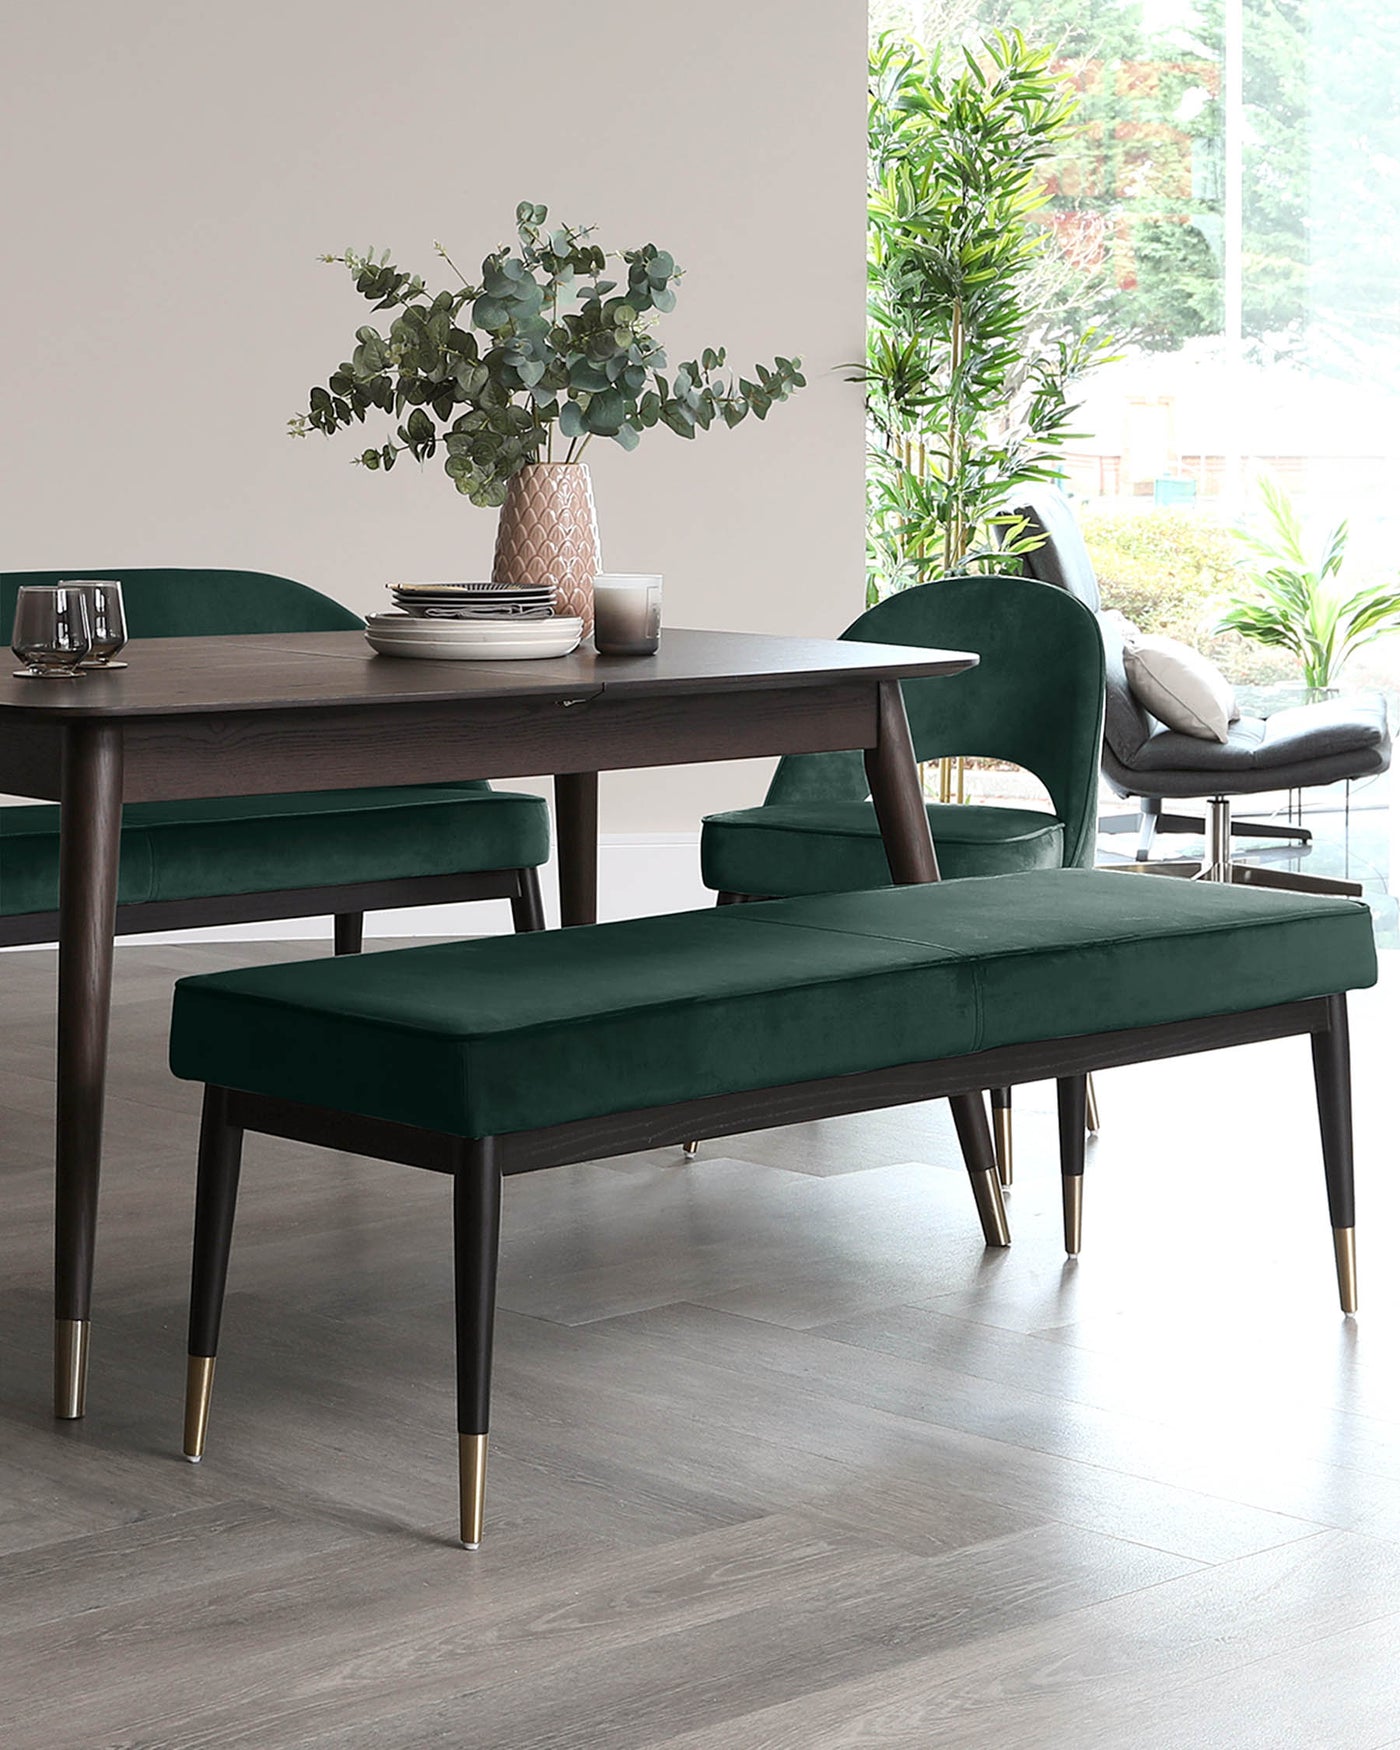 A dining set featuring a dark wood table with an elegant, minimalistic design and tapered legs. Two plush, emerald green velvet upholstered benches with dark wooden legs and brass detailing serve as seating, with one bench tucked neatly under the table.